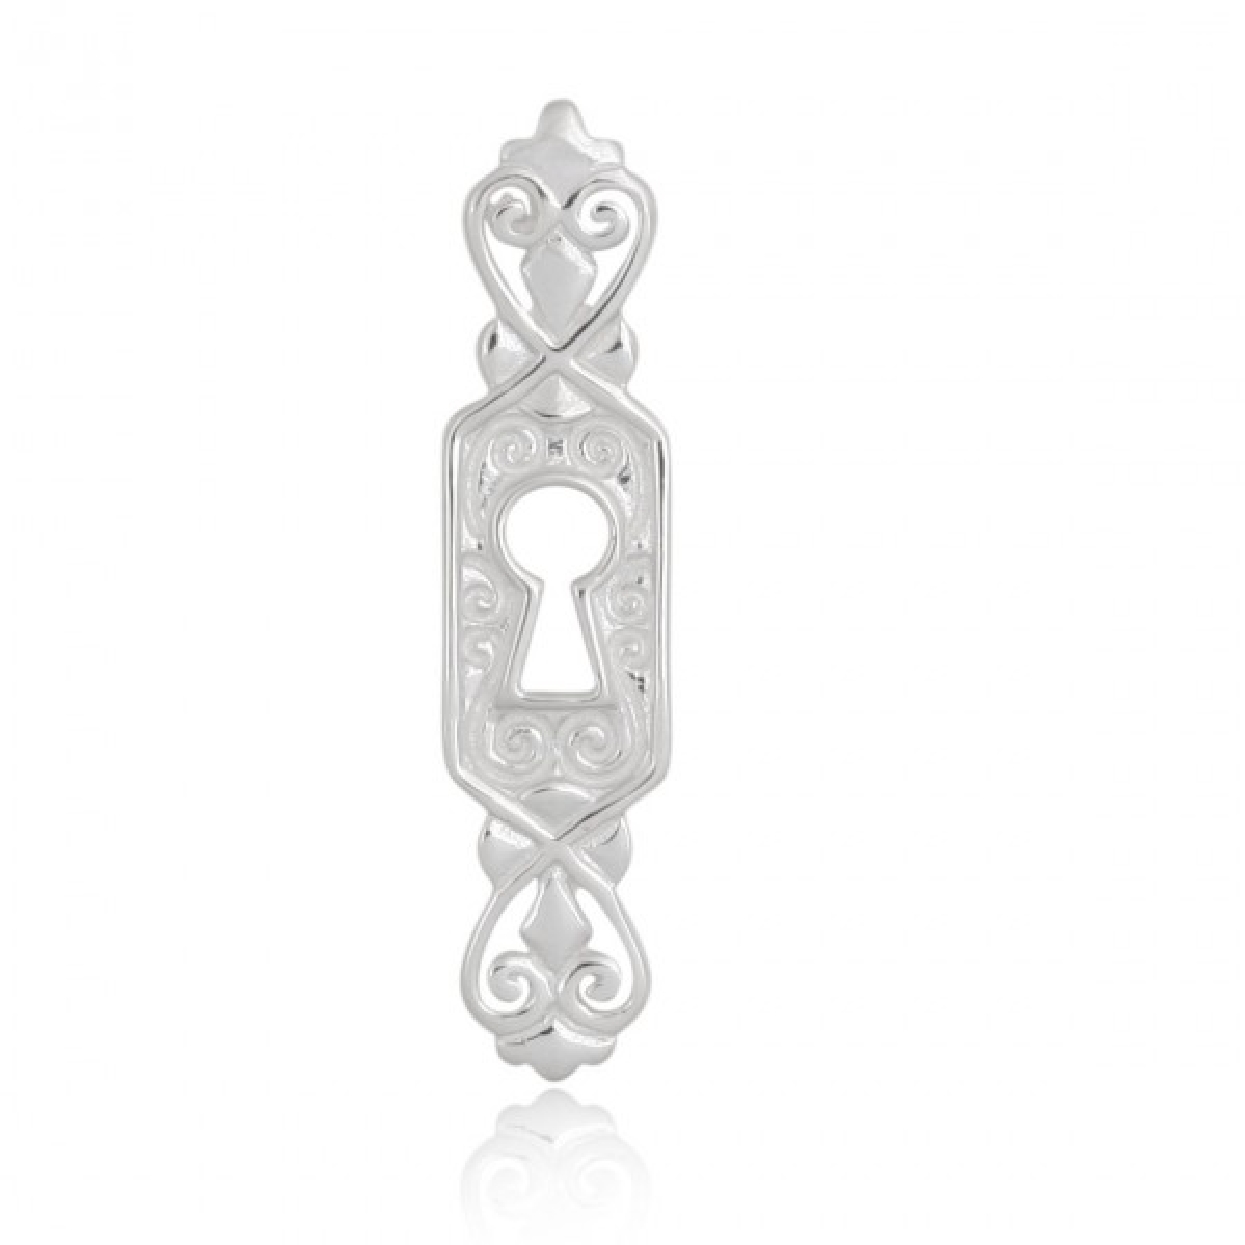 Southern Gates Sterling Silver Terrace Key Hole Pendant; 34x8mm

P870
Discontinued